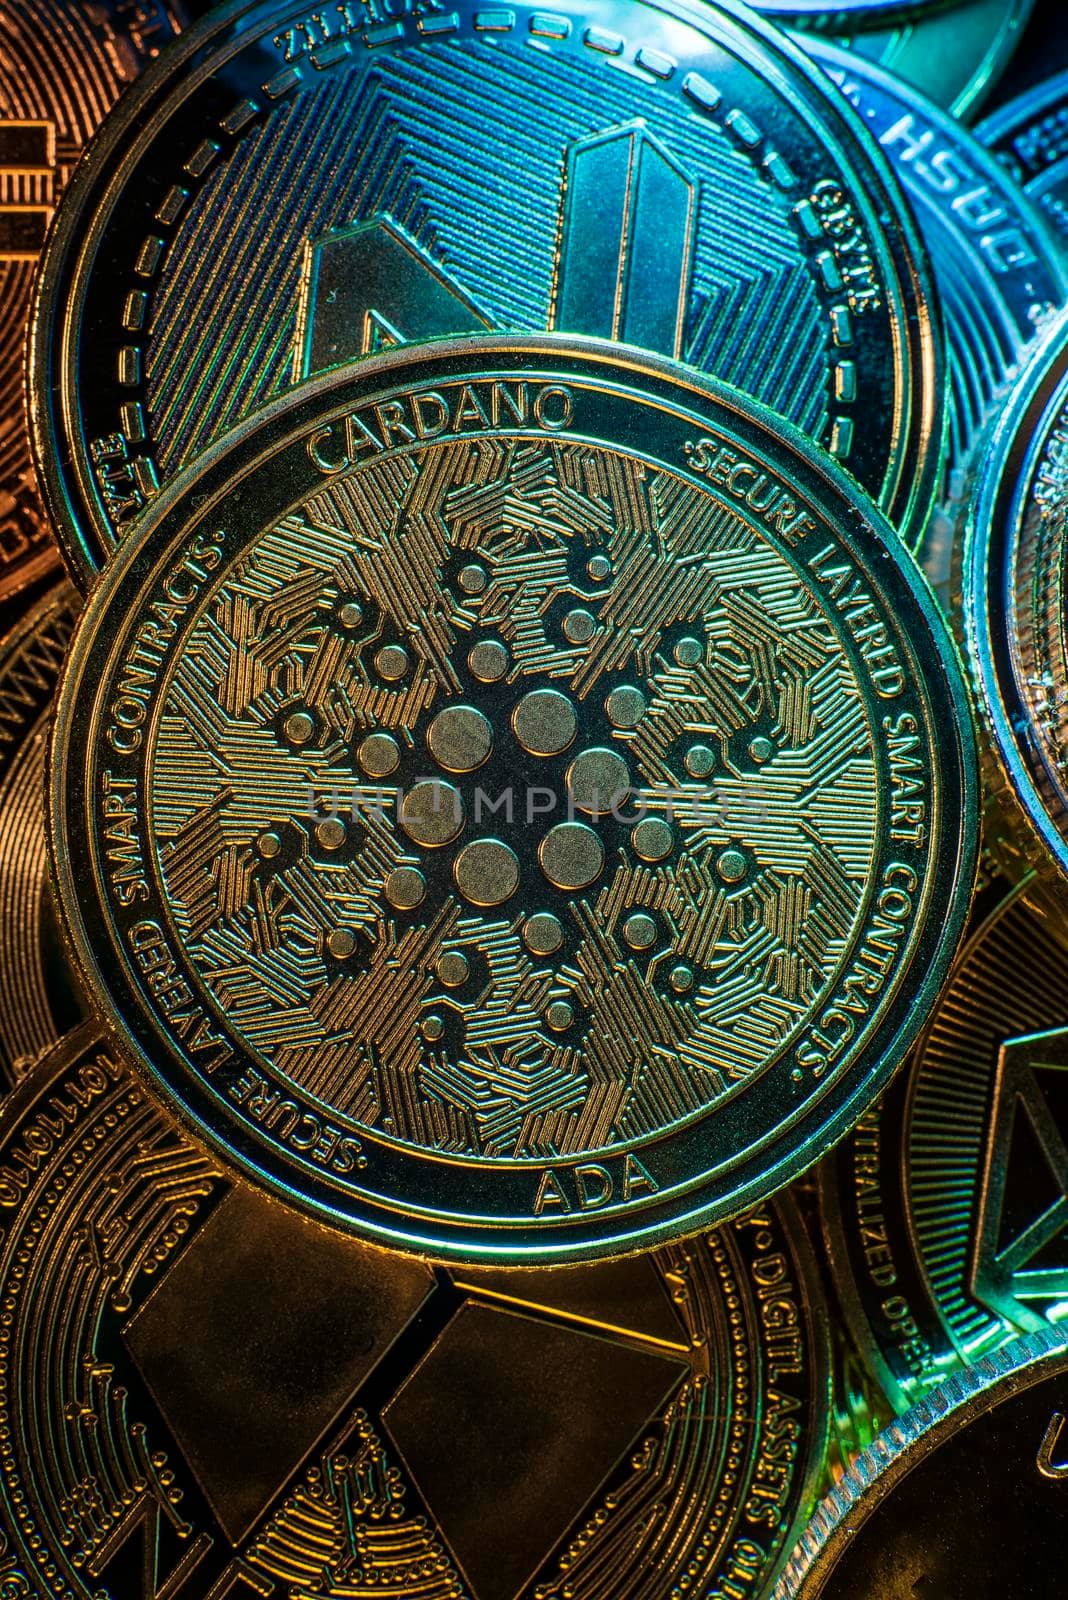 Horizontal view of cryptocurrency tokens, including Cardano, Bitcoin, dogecoin, and Ethereum seen from above on a black background by avirozen